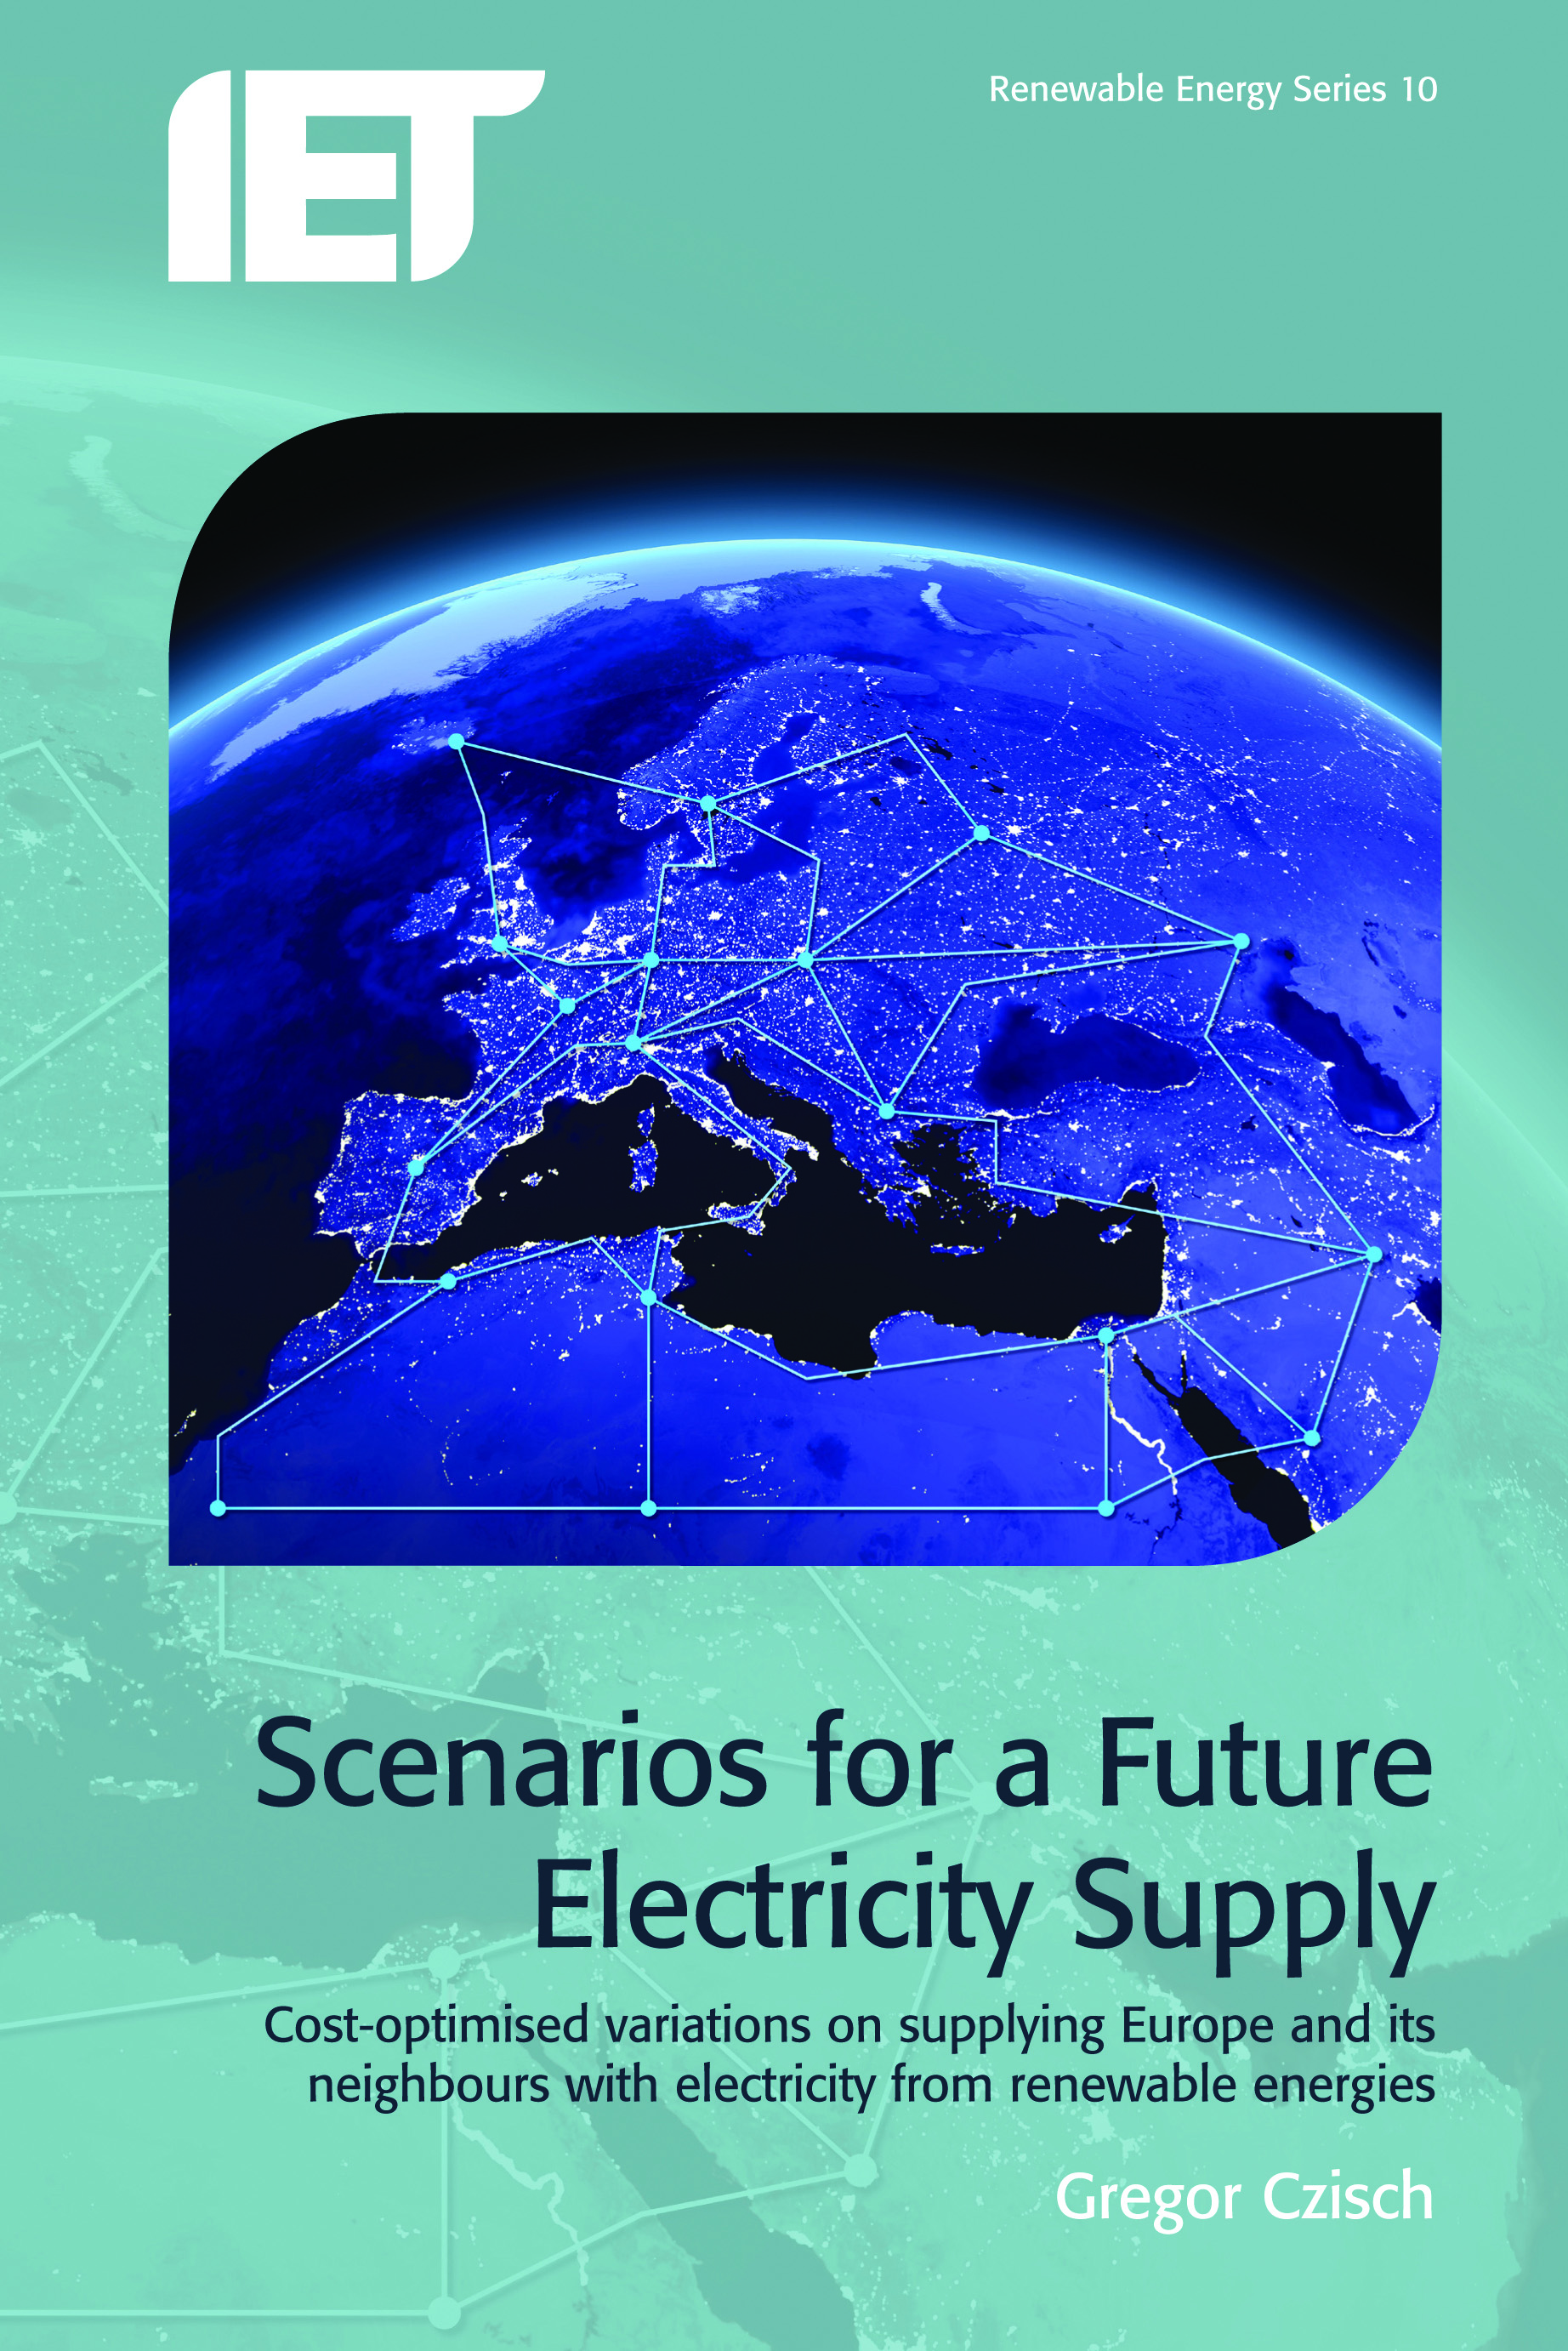 Scenarios for a Future Electricity Supply, Cost-optimised variations on supplying Europe and its neighbours with electricity from renewable energies